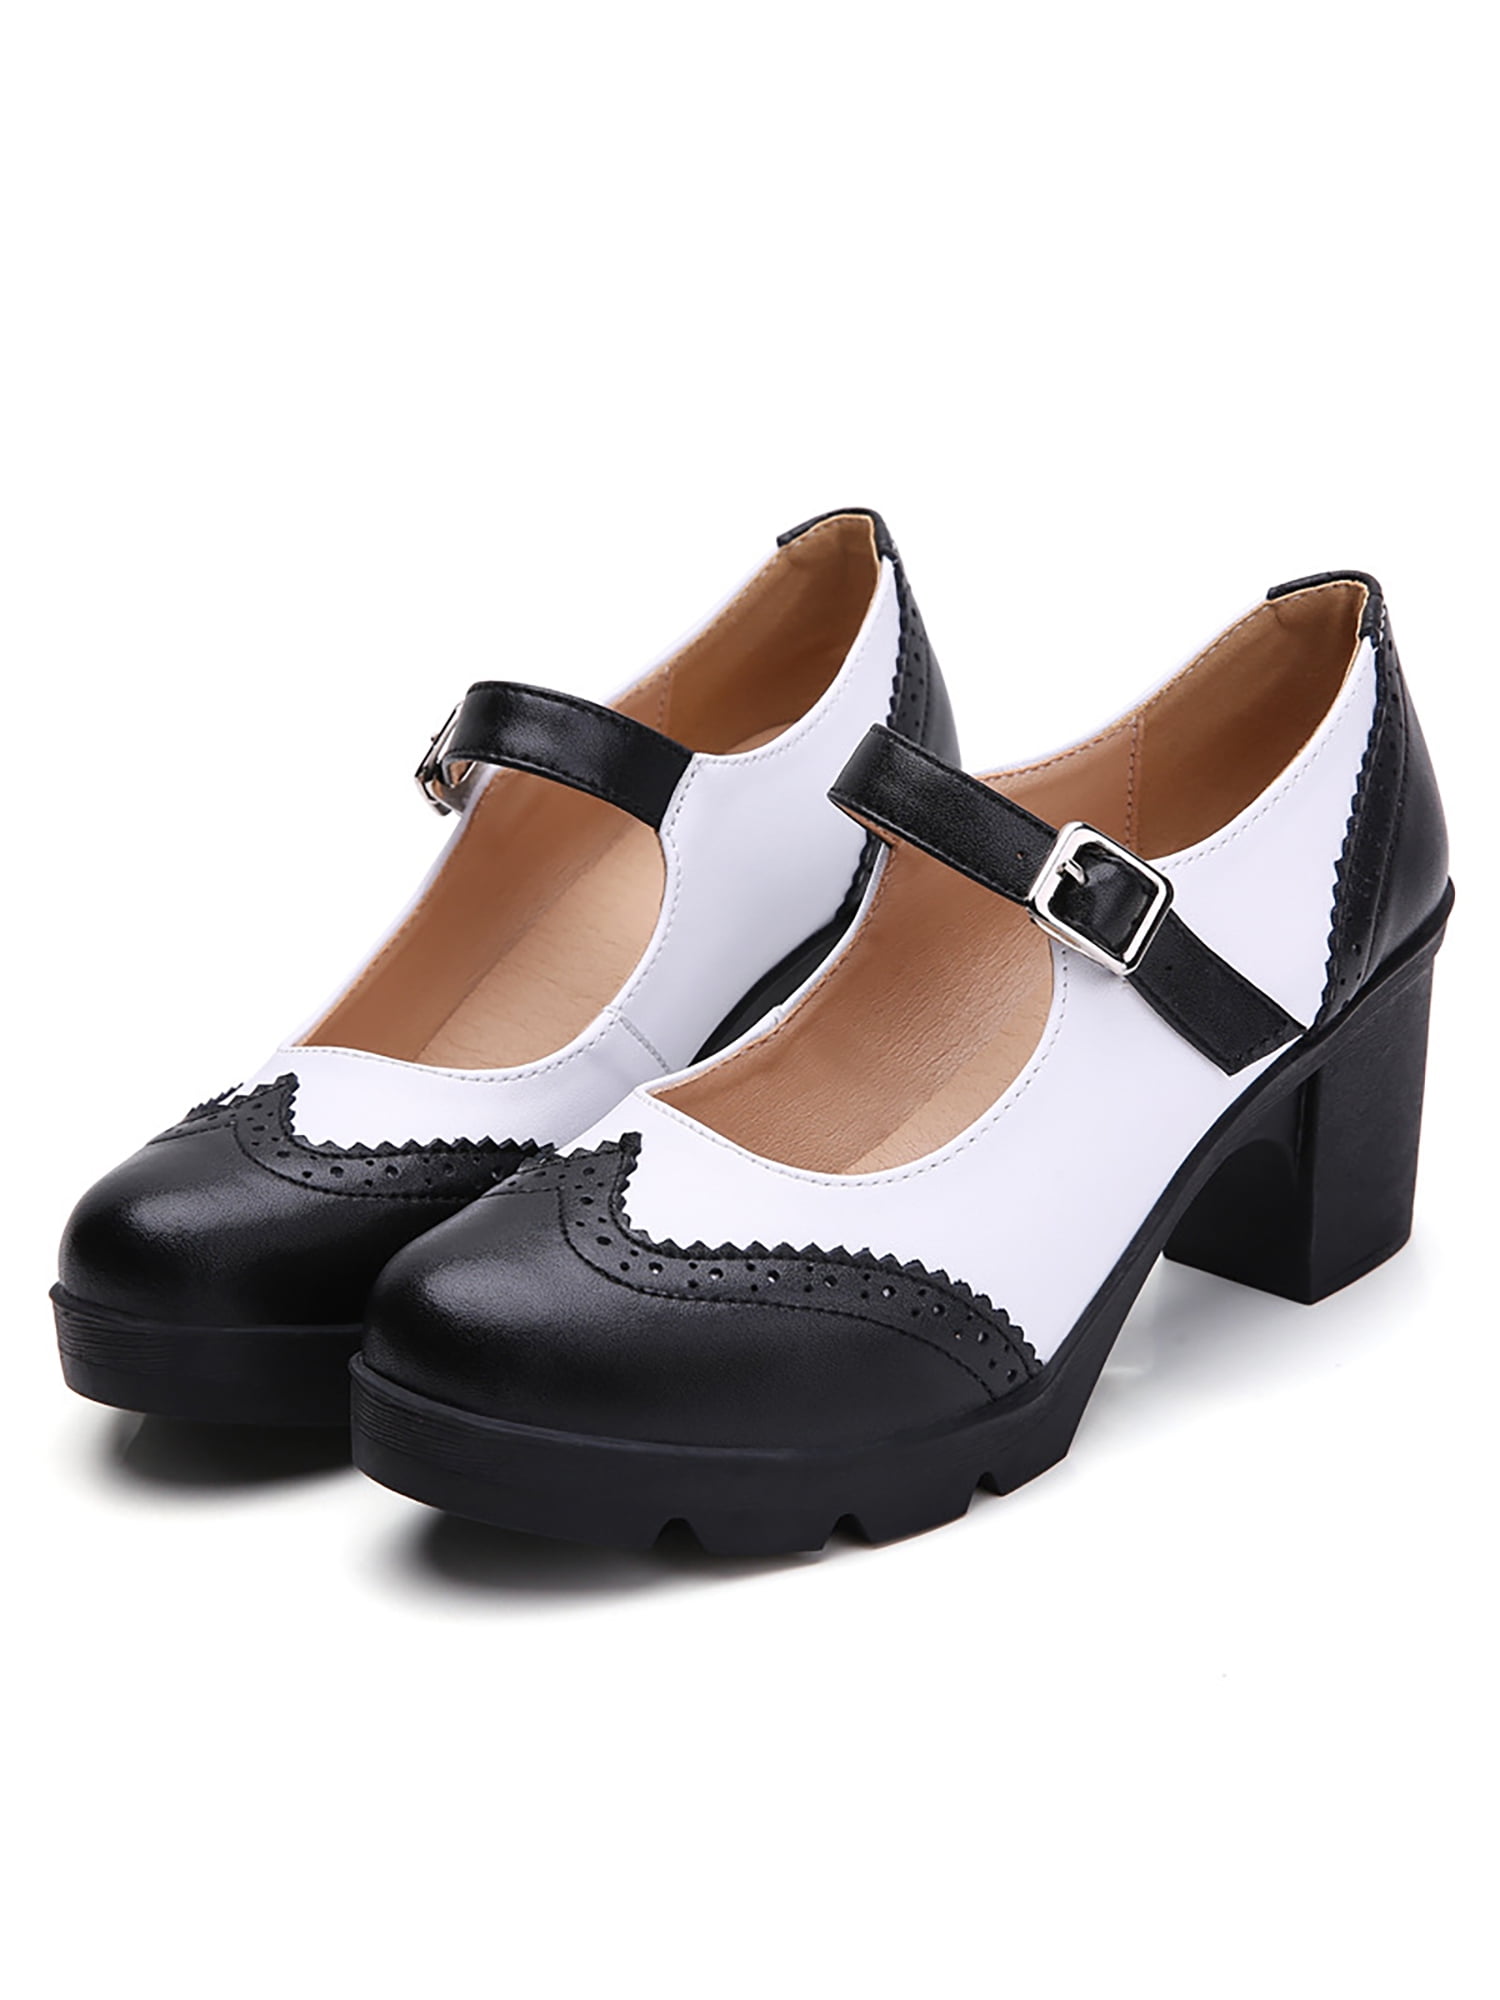 Cute Lolita Round Toe Women Cosplay Maid Shoes School Mary Janes Shoes Flats Sz